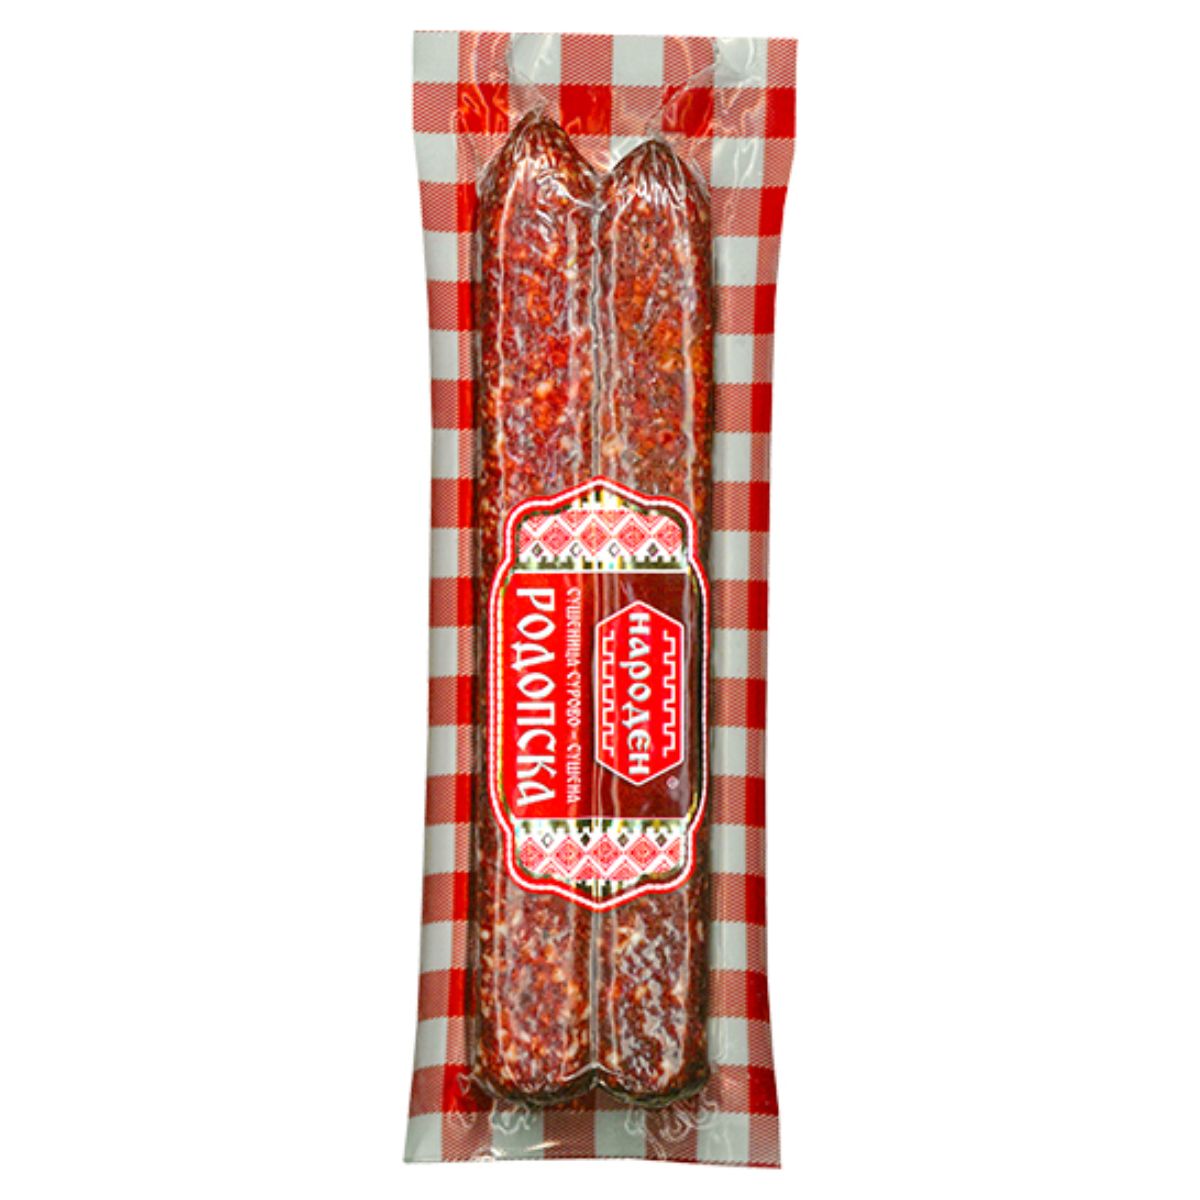 A package of Bella - Naroden Raw Dried Sushenitsa - 180g in a red and white checkered pattern.